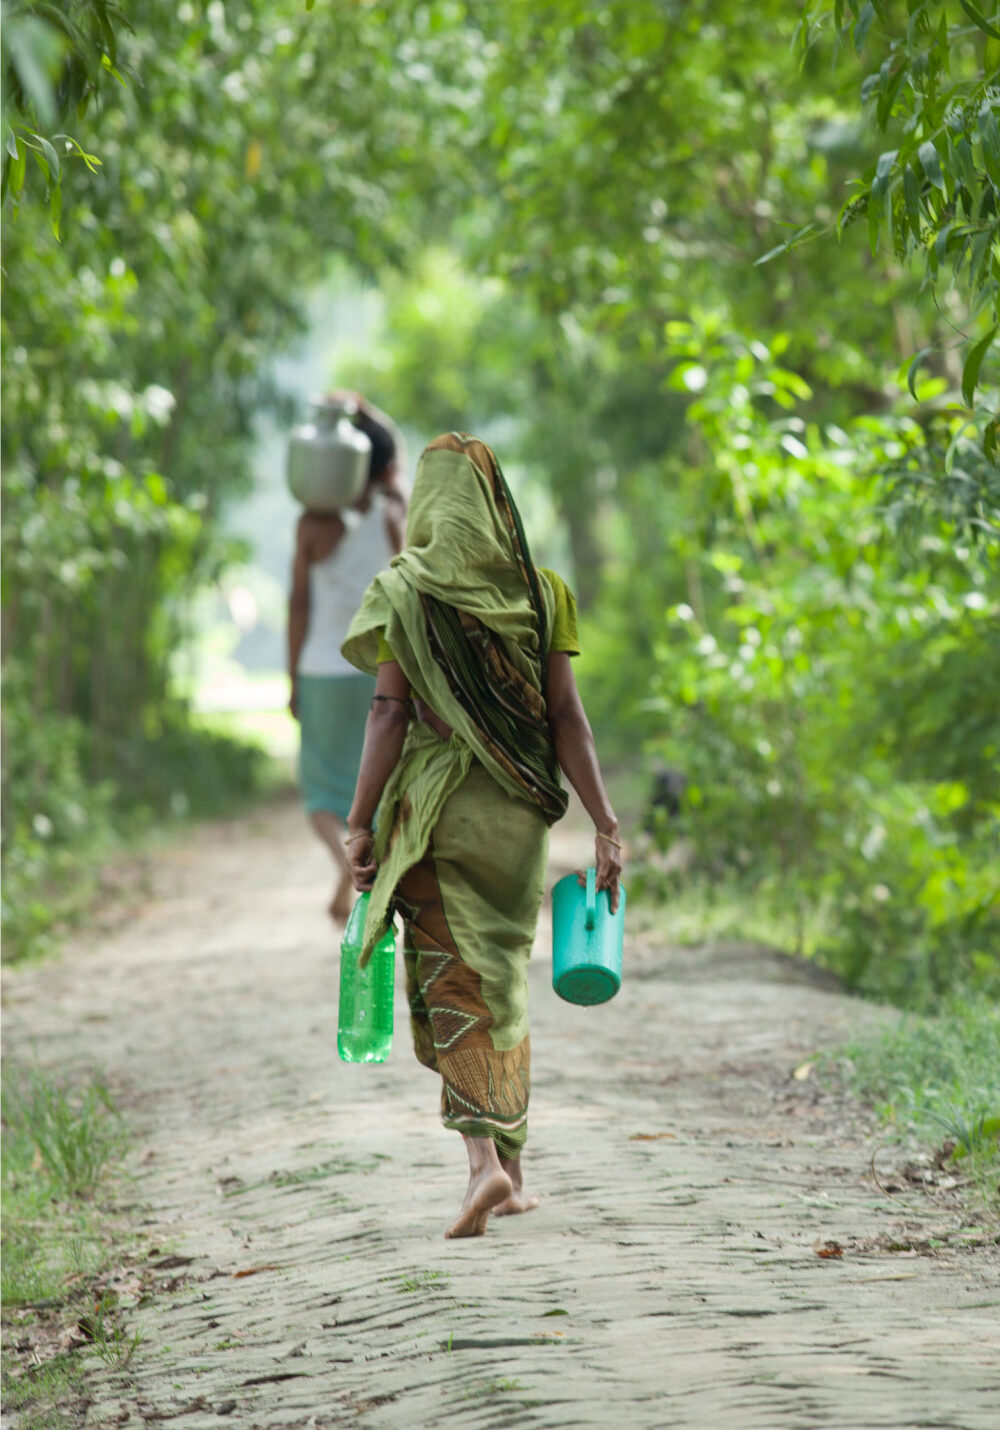 villagers carrying water | Support Clean Water | Get Involved | Clean Water in India | Where We Work | Water For People